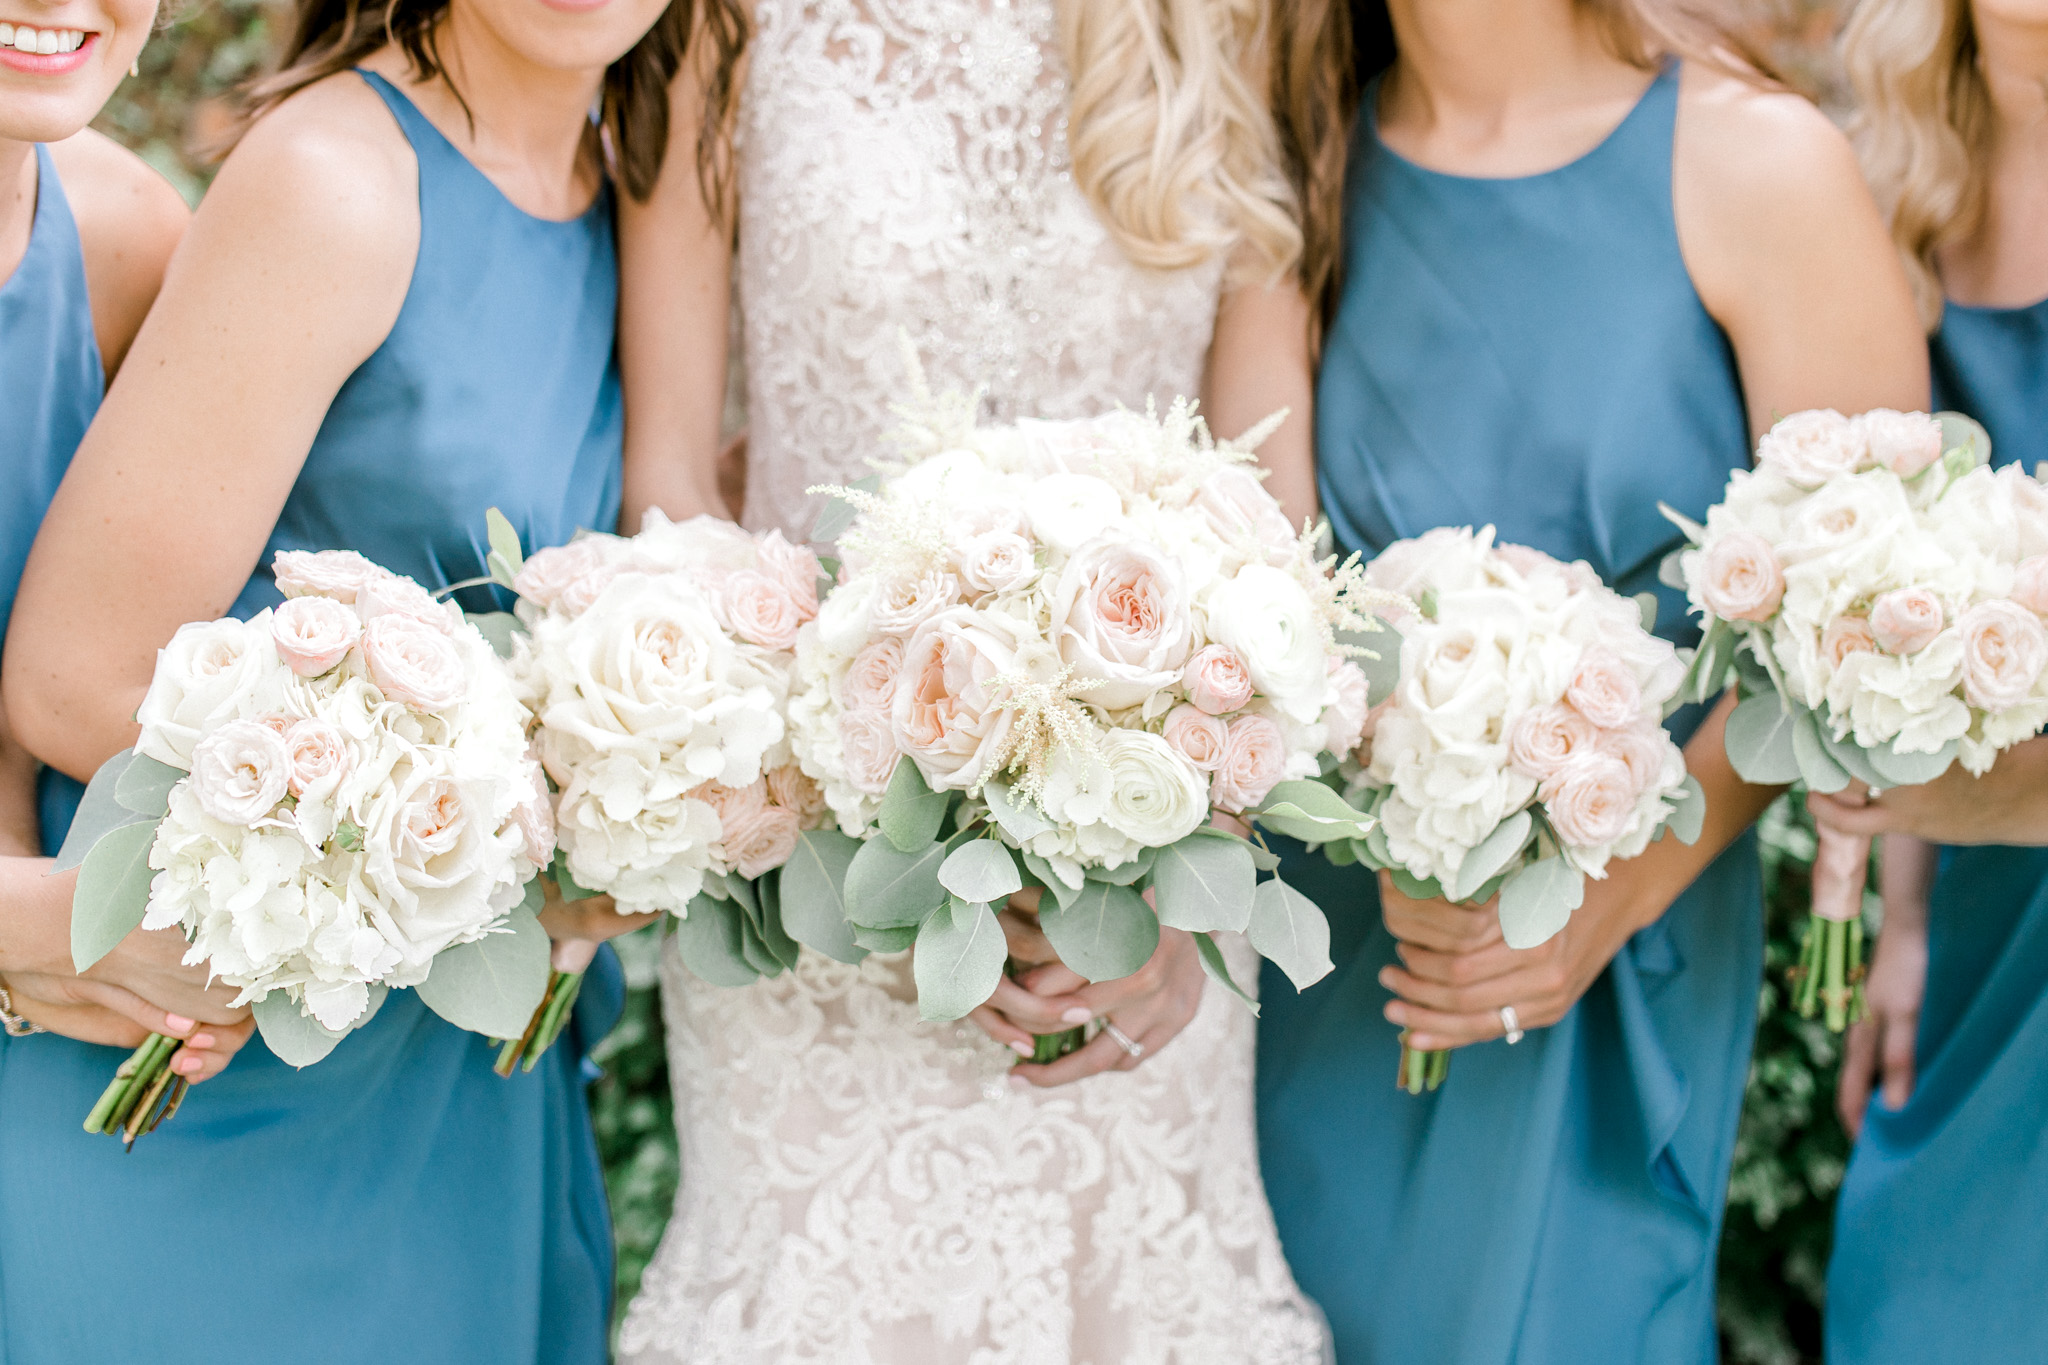 Elegant, Trendy Wedding in Detroit Michigan | Lace Wedding Gown and Royale Blue Tux | Floral Tie | Light &amp; Airy Michigan Wedding Photographer